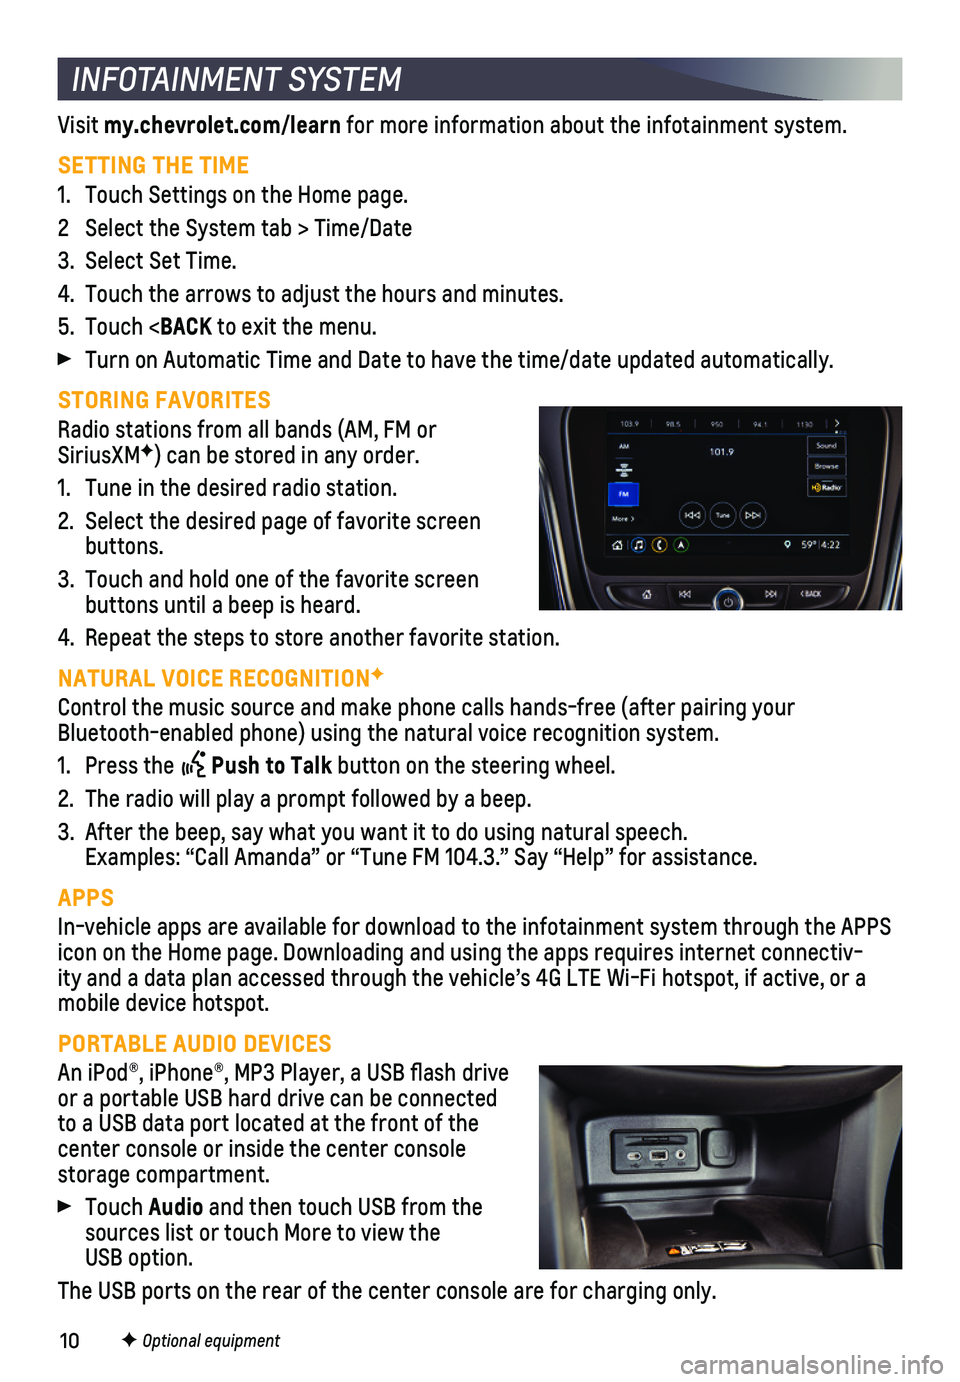 CHEVROLET EQUINOX 2019  Get To Know Guide 10F Optional equipment
INFOTAINMENT SYSTEM
Visit my.chevrolet.com/learn for more information about the infotainment system.
SETTING THE TIME
1. Touch Settings on the Home page. 
2 Select the System ta